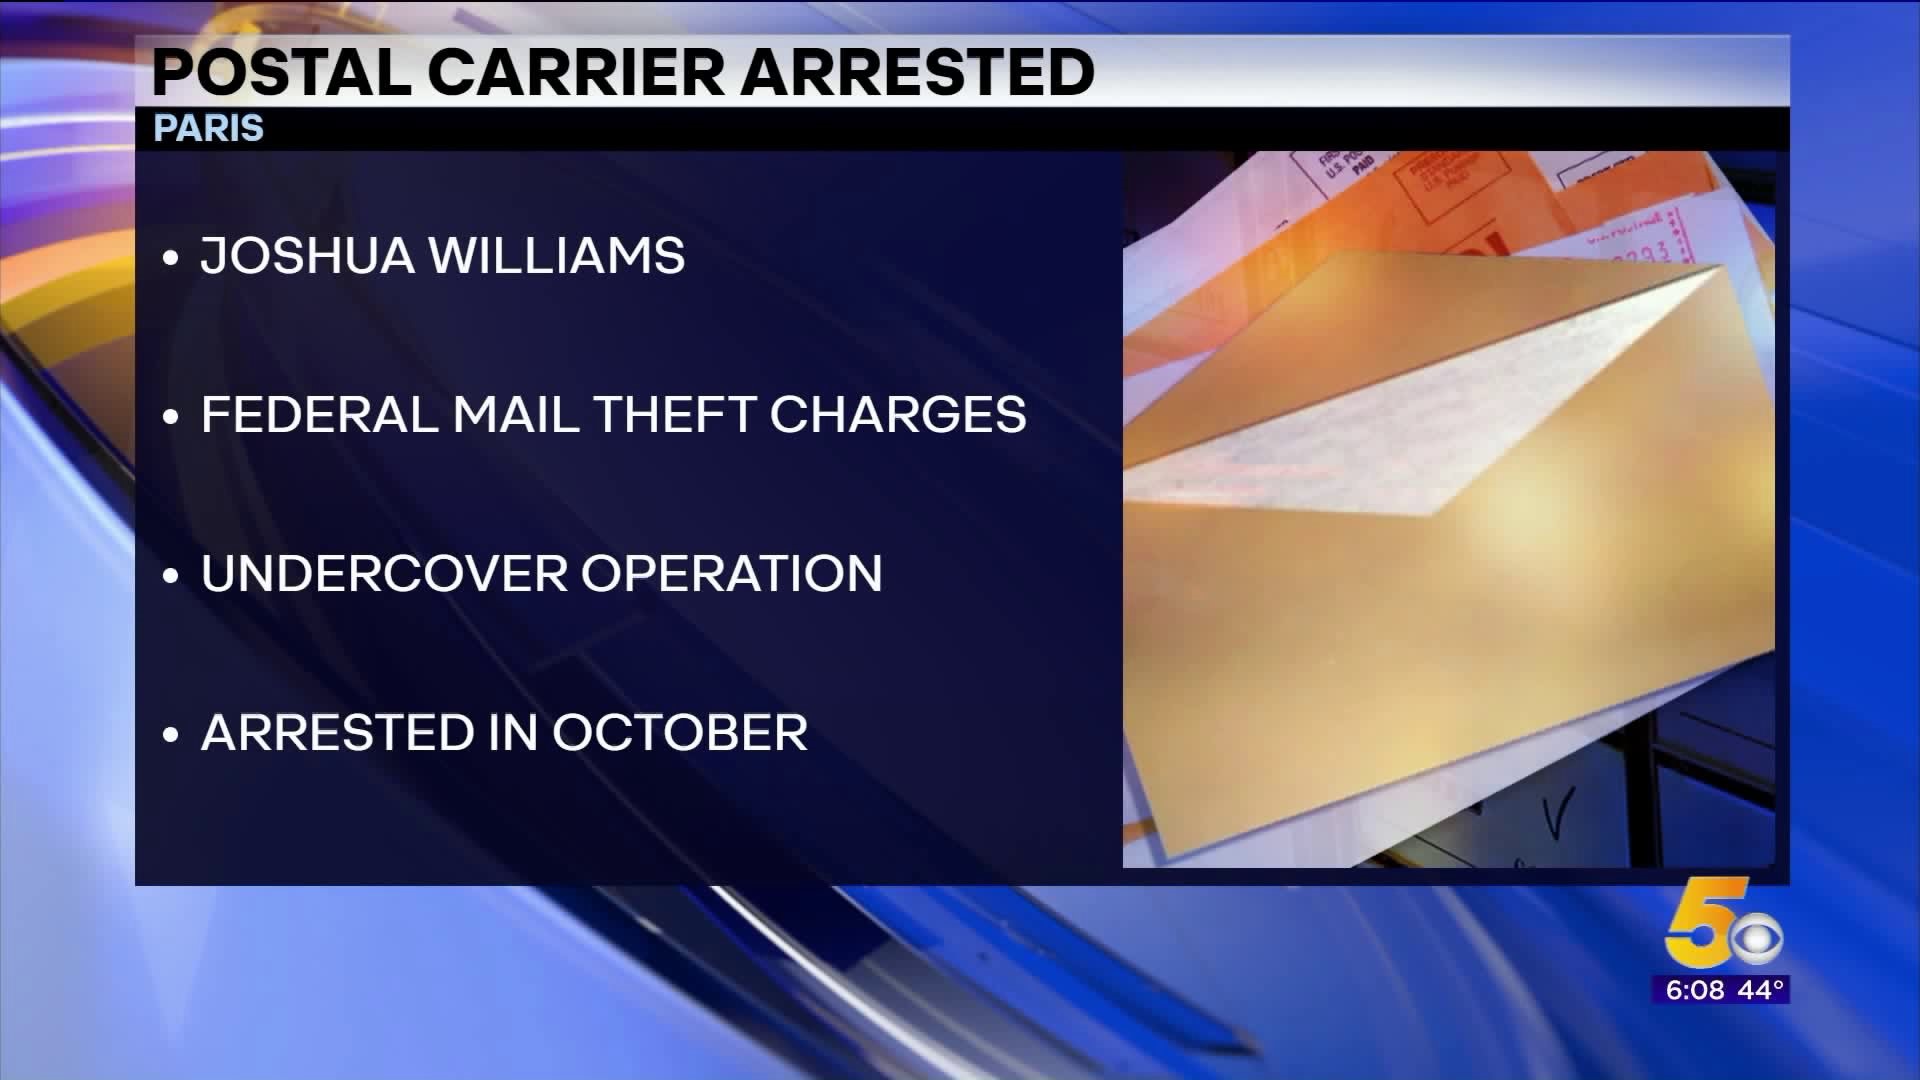 Arkansas Postal Carrier Arrested On Federal Mail Theft Charges